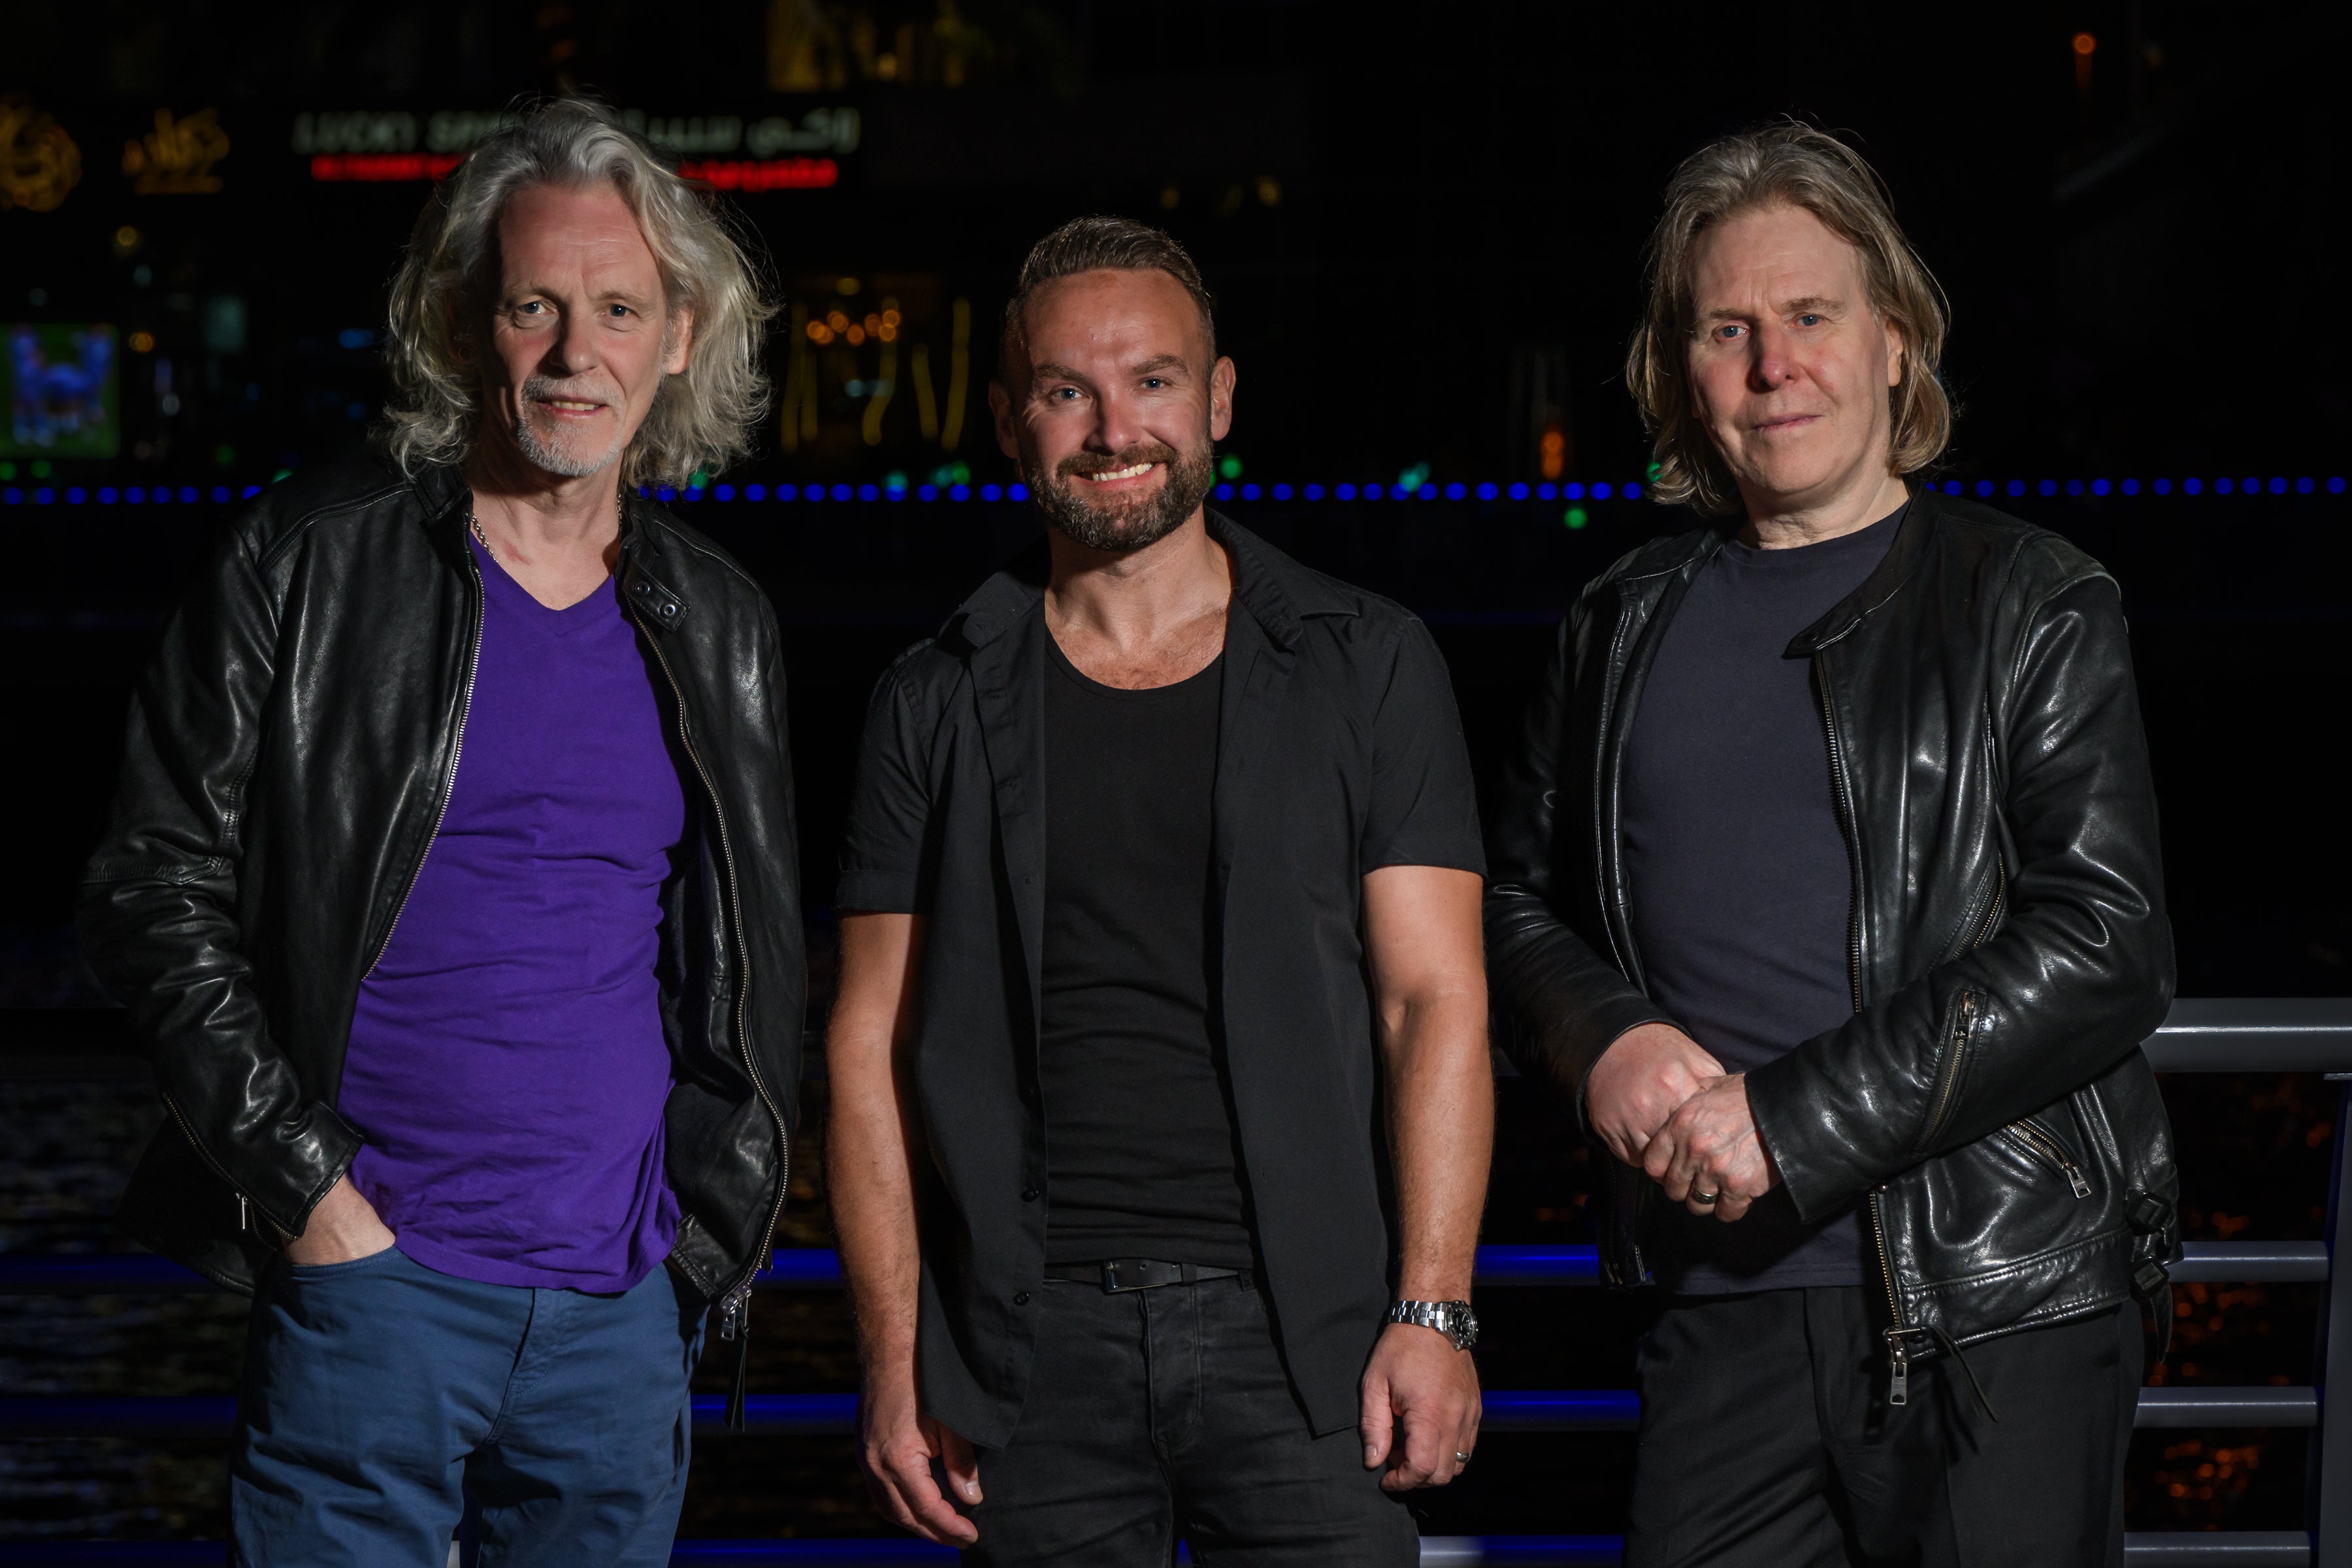 exclusive presale password for Wet Wet Wet face value tickets in Salford Quays